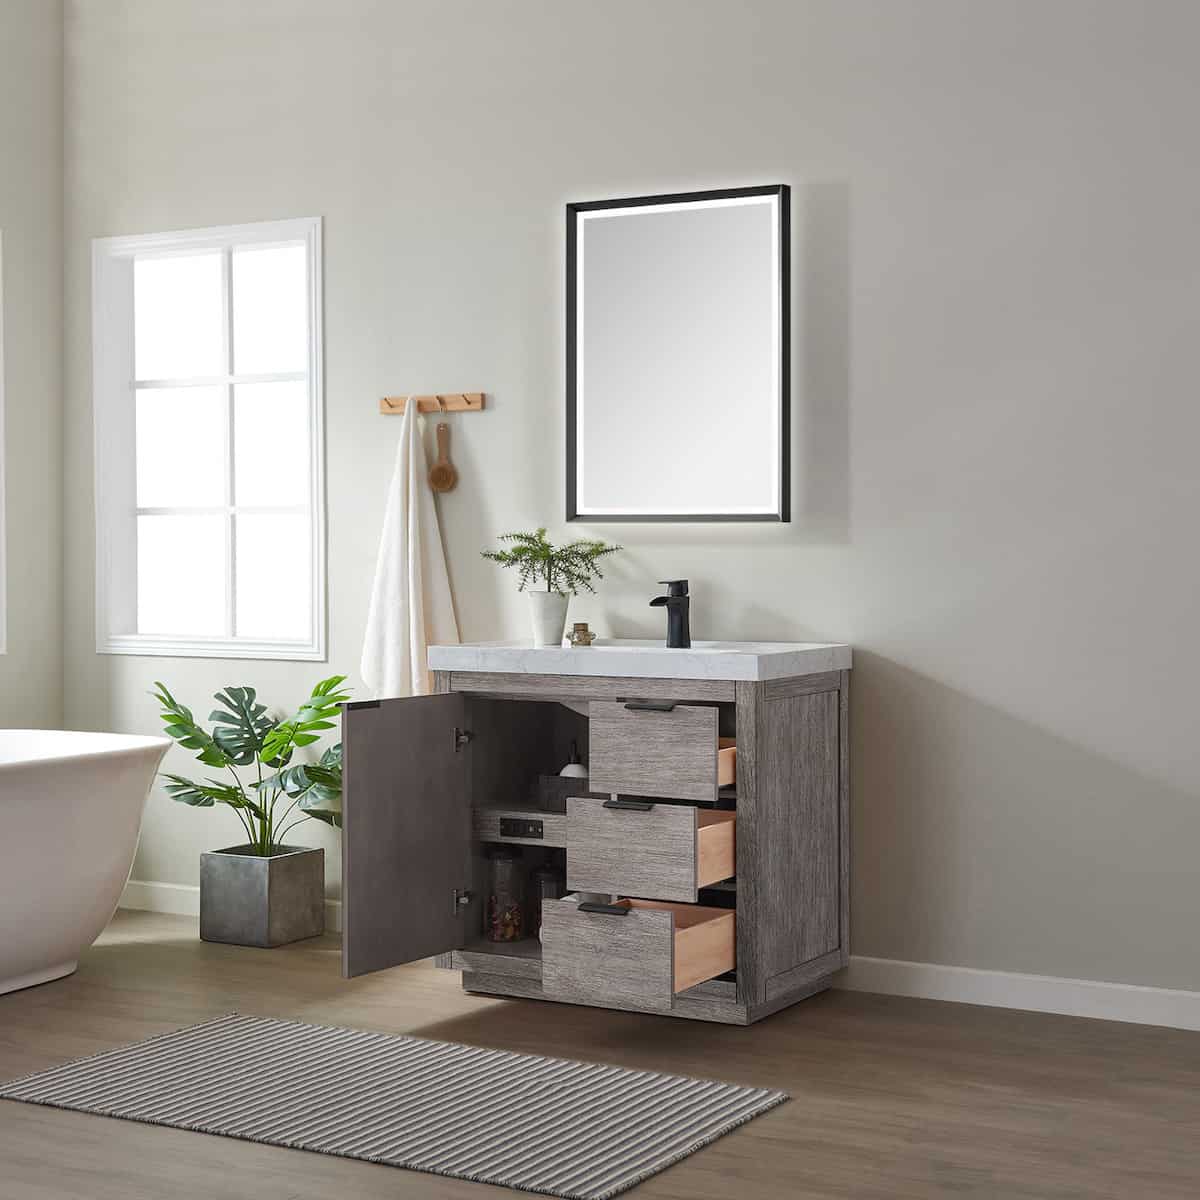 Vinnova Leiza 36 Inch Freestanding Single Sink Vanity in Classical Grey with White Composite Grain Countertop With Mirror Inside 701536-CR-GW